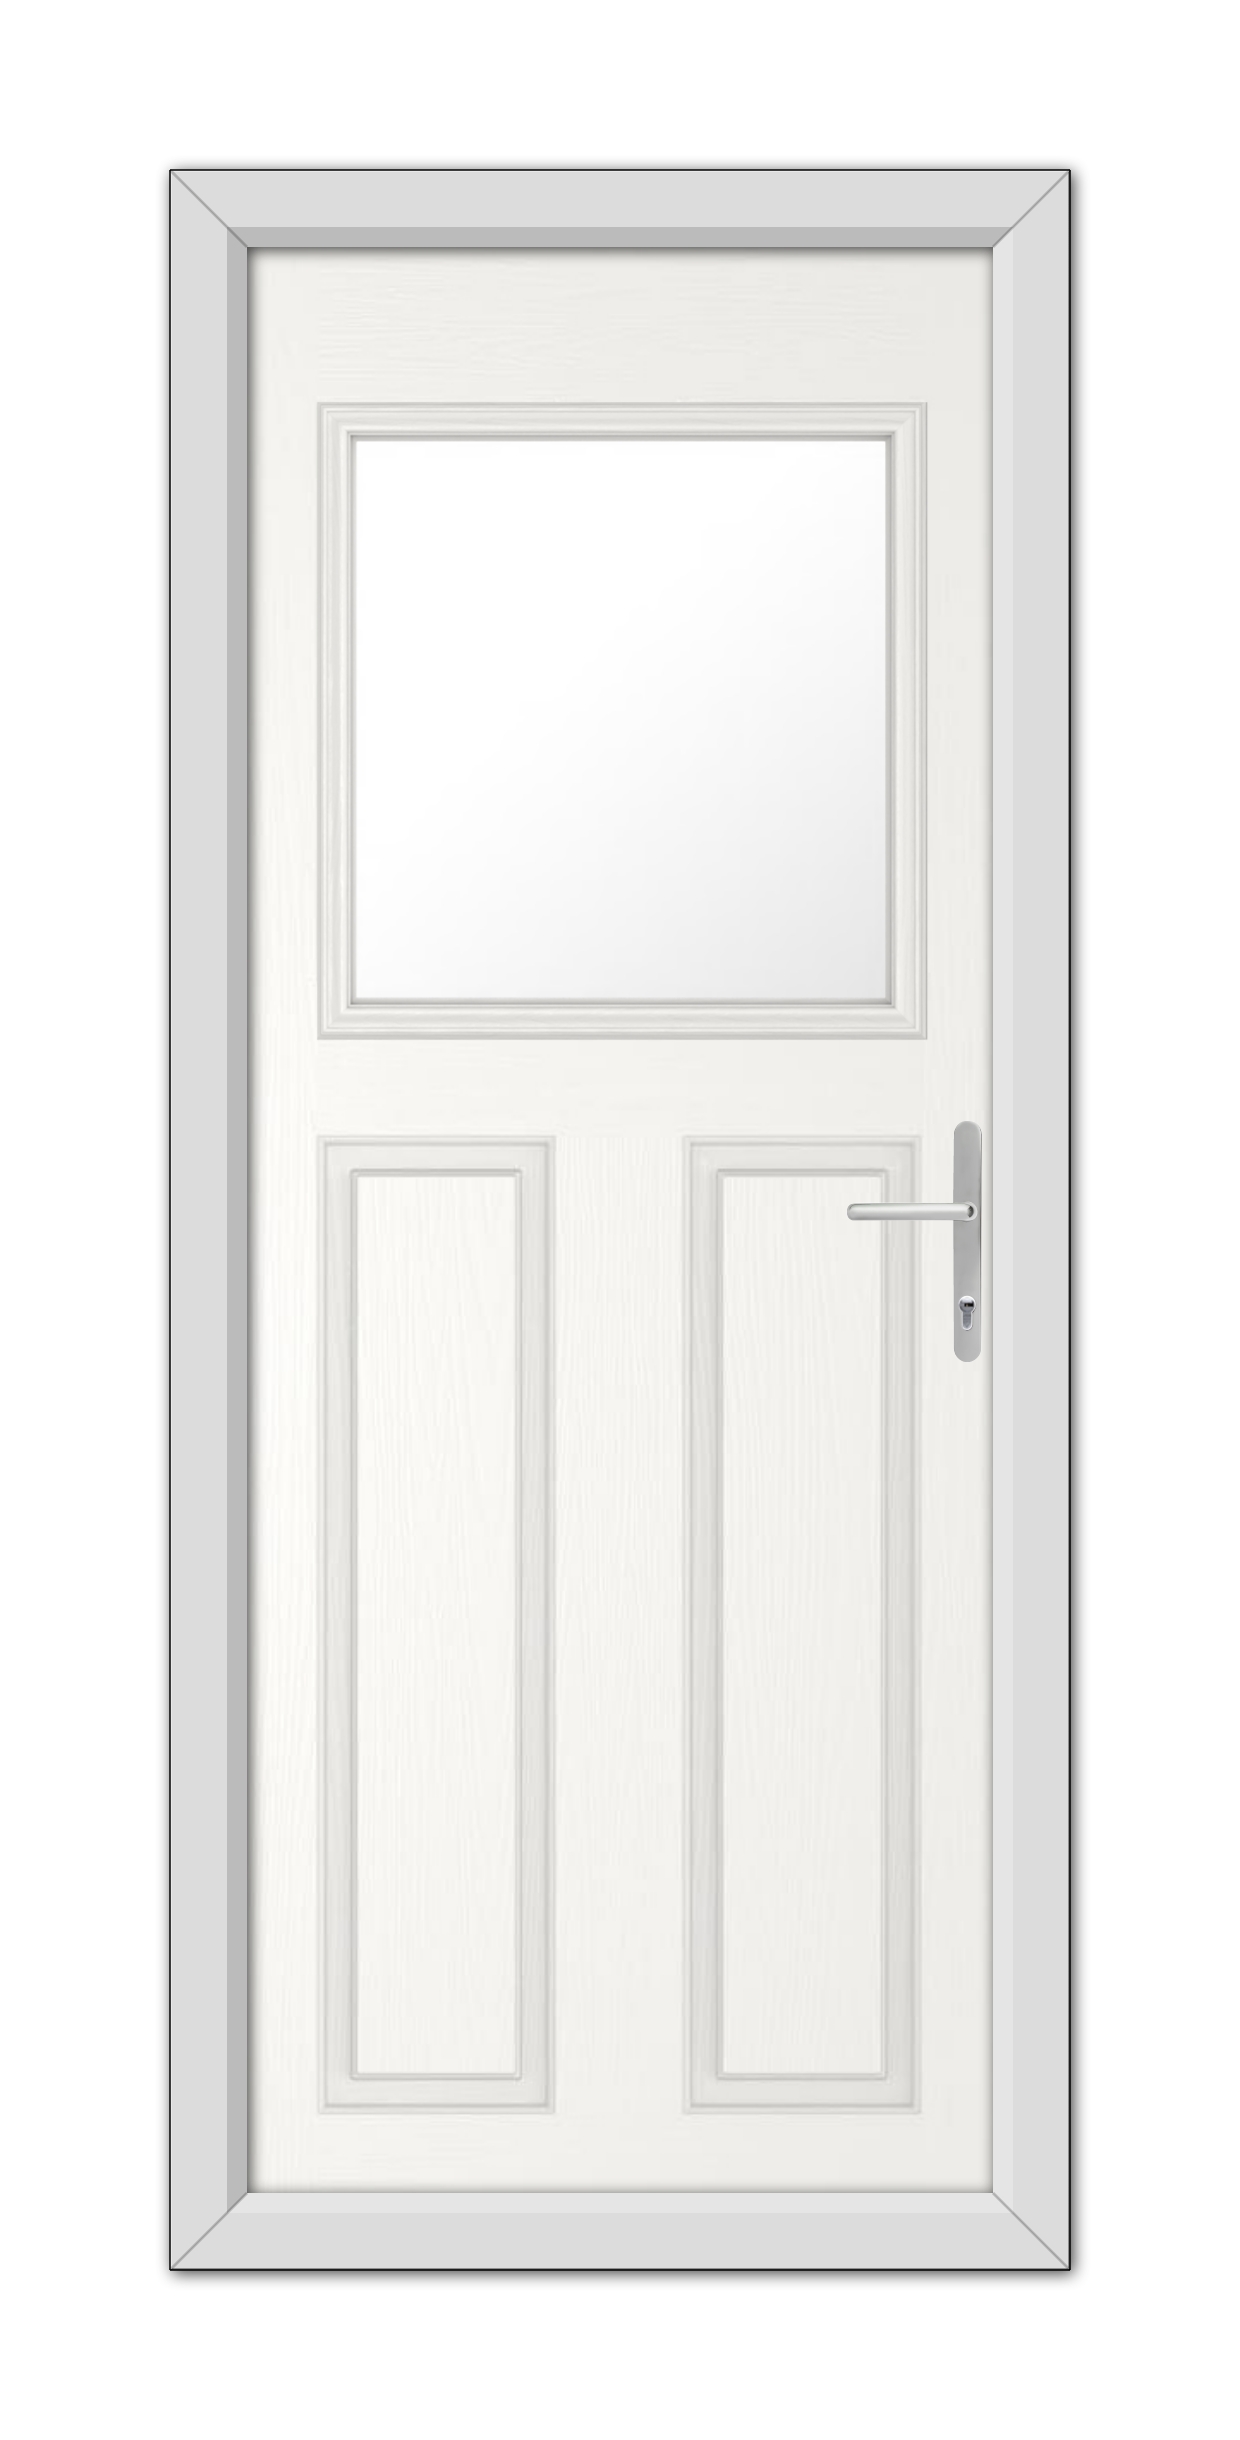 A White Axwell Composite Door 48mm Timber Core featuring a small square window at the top, two vertical panels below, and a metal handle on the right.